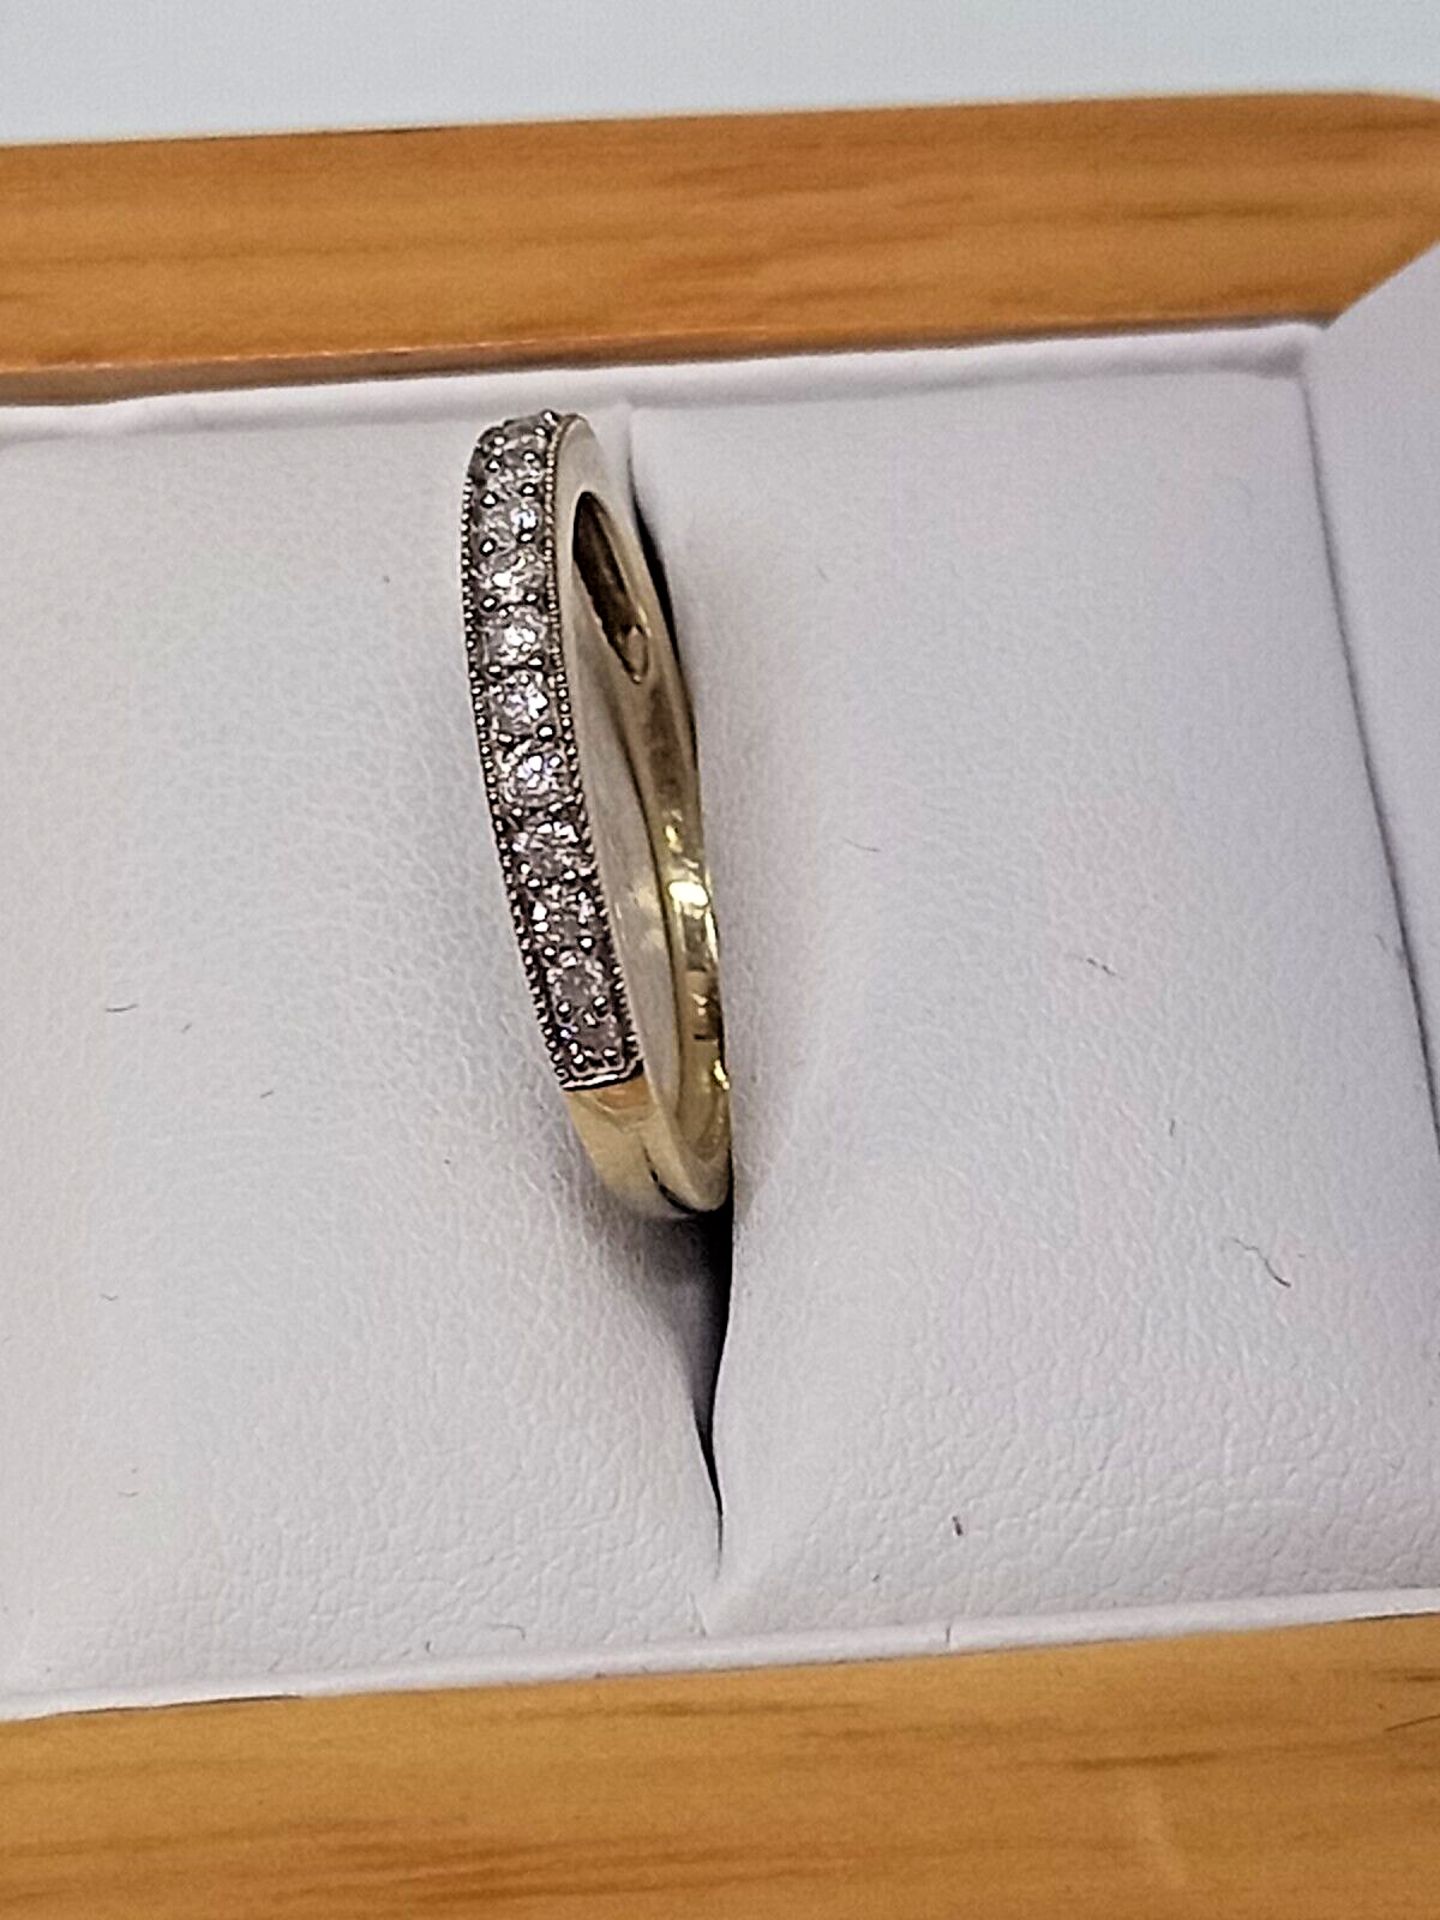 0.20CT DIAMOND ETERNITY RING/9CT YELLOW GOLD IN GIFT BOX WITH VALUATION CERTIFICATE OF £1195 - Image 2 of 5